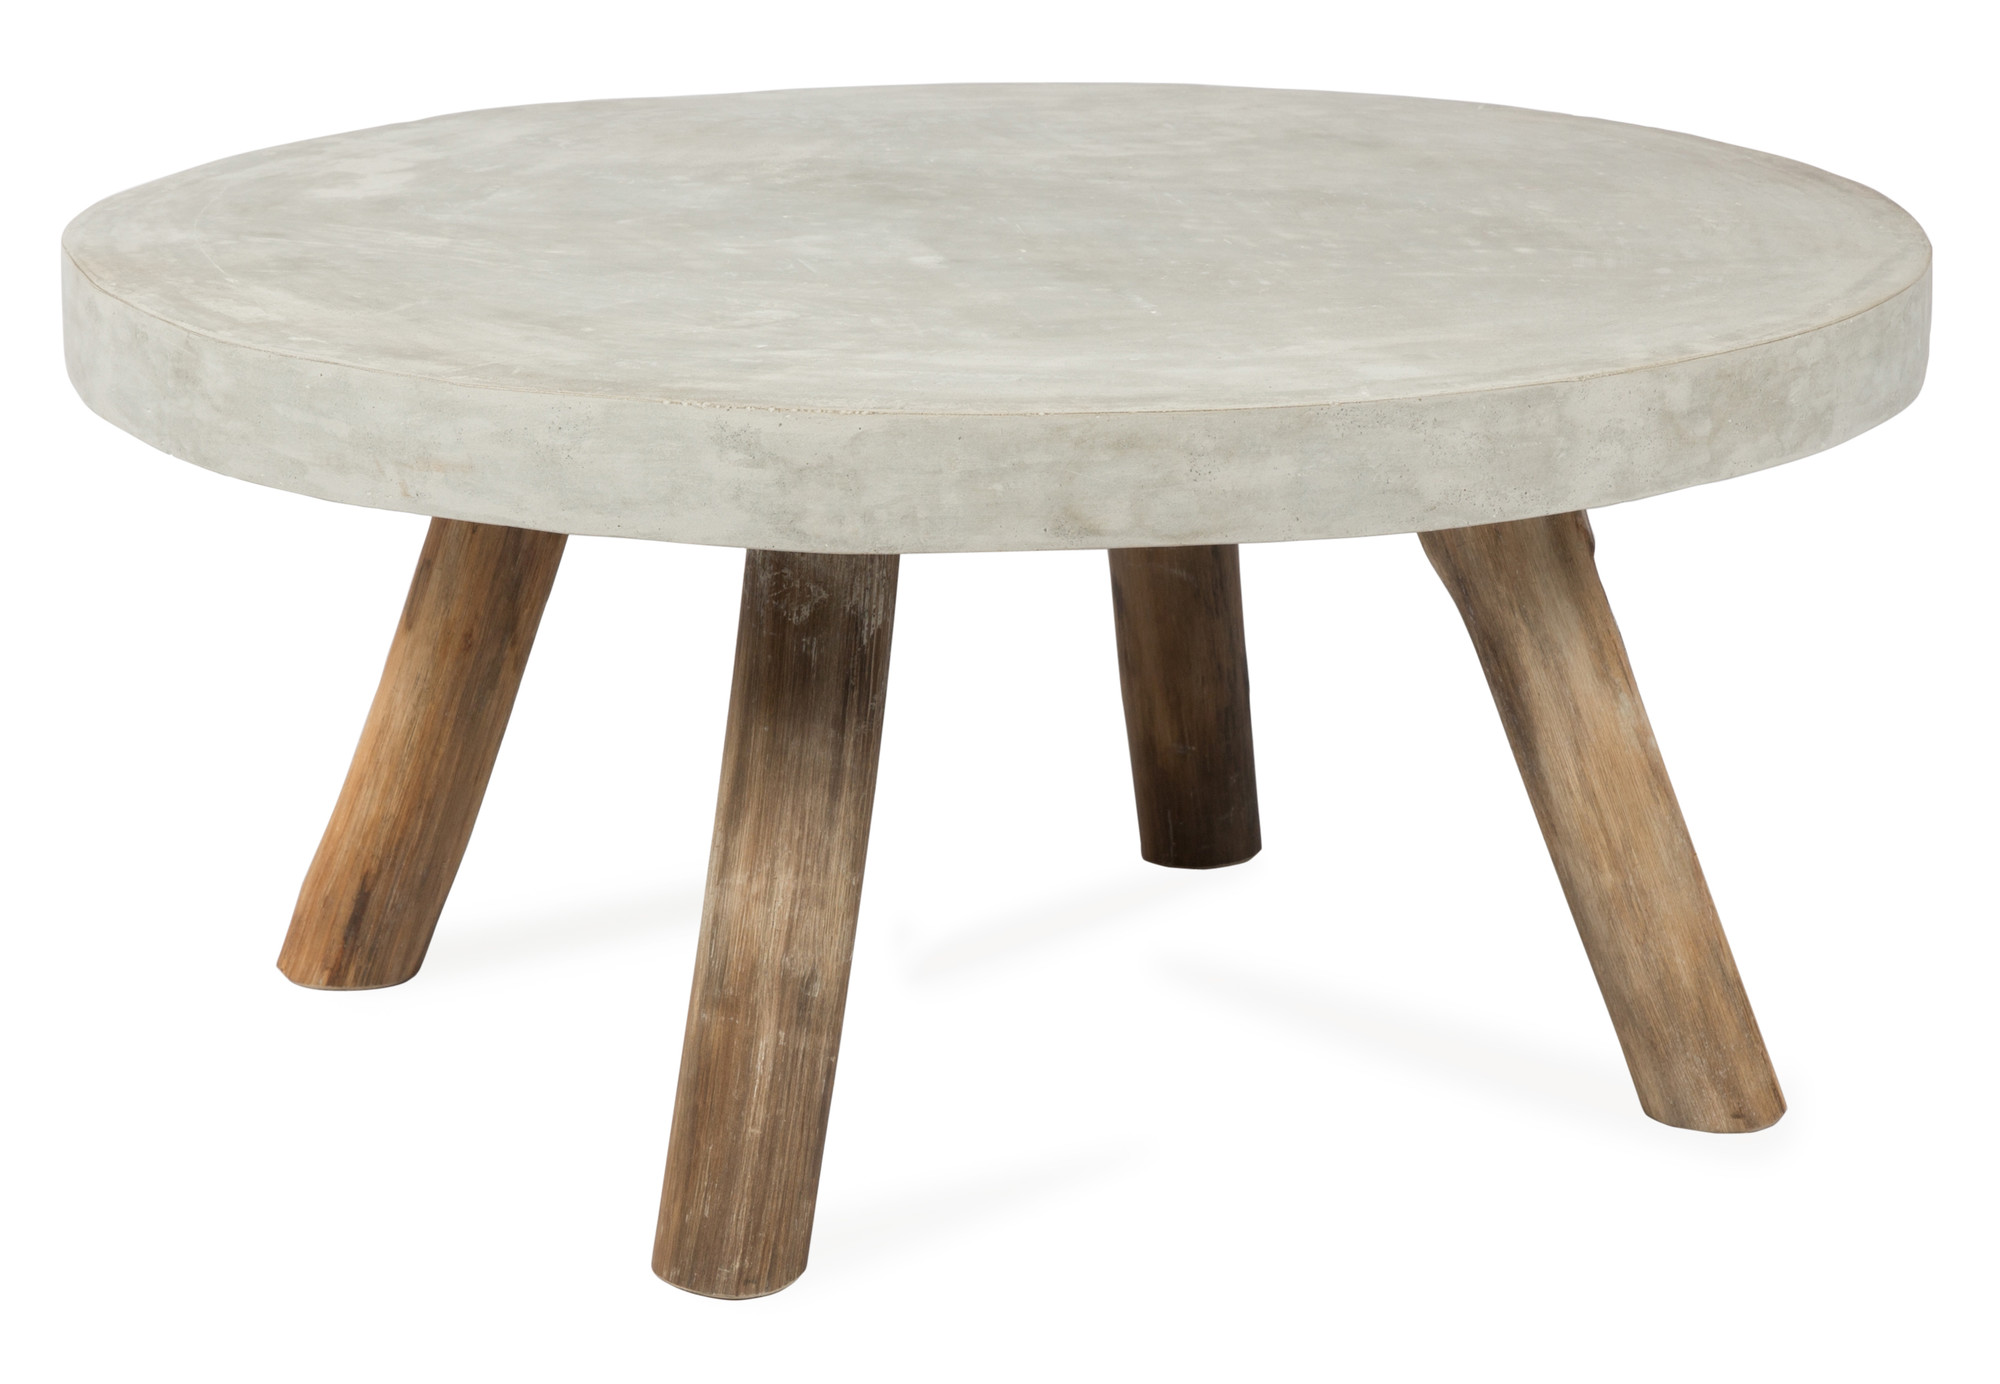 Lifestyle Traders Round Concrete Coffee Table Reviews Temple Webster